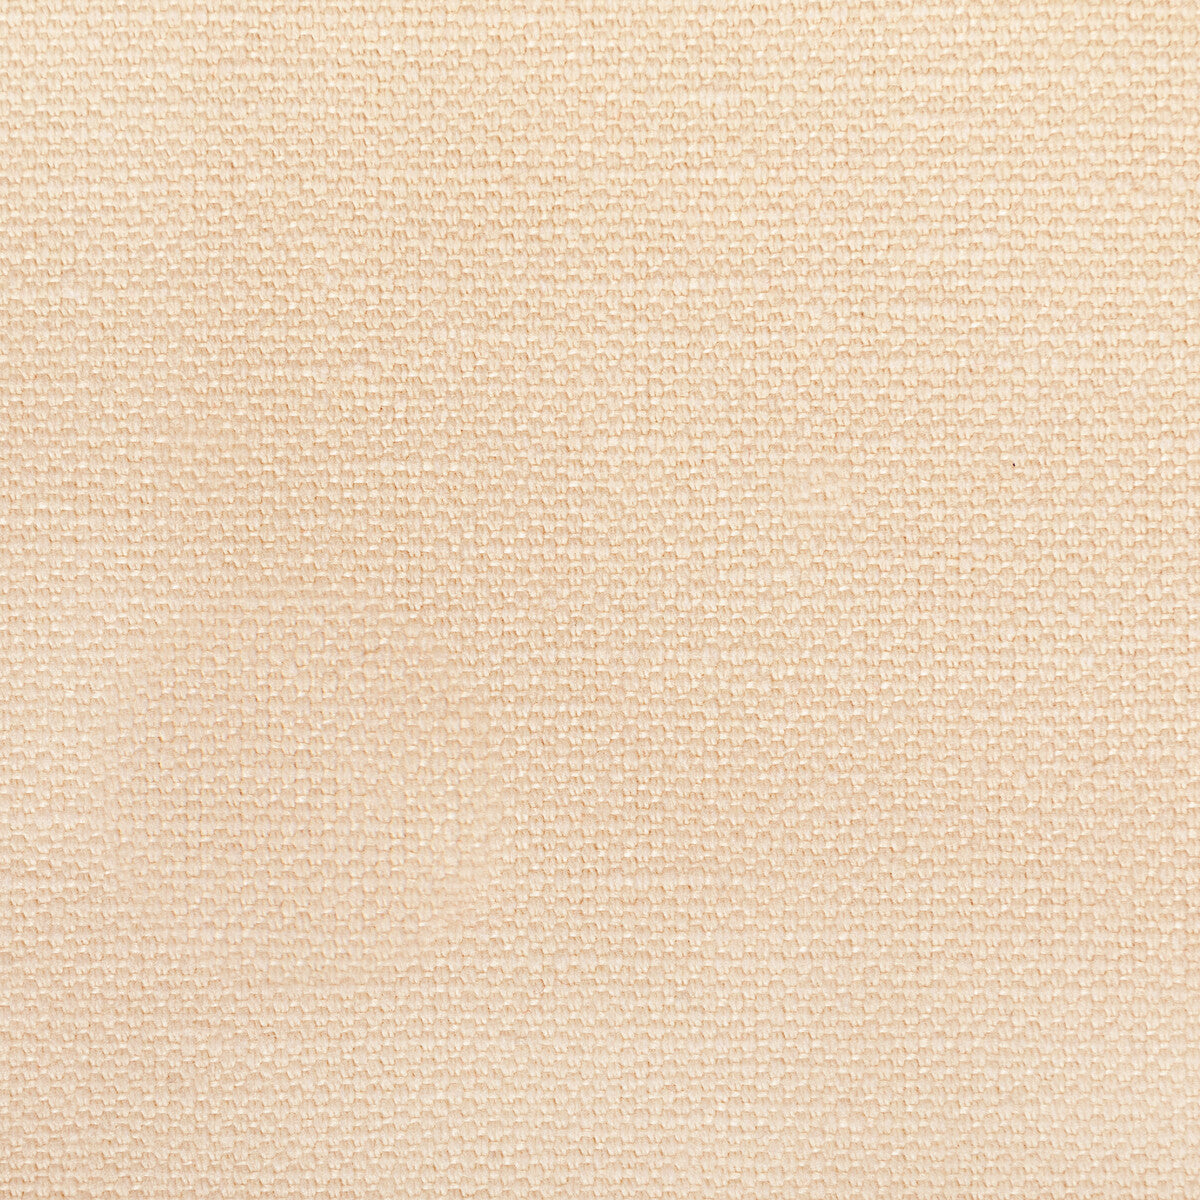 Carson fabric in natural color - pattern 36282.1111.0 - by Kravet Basics